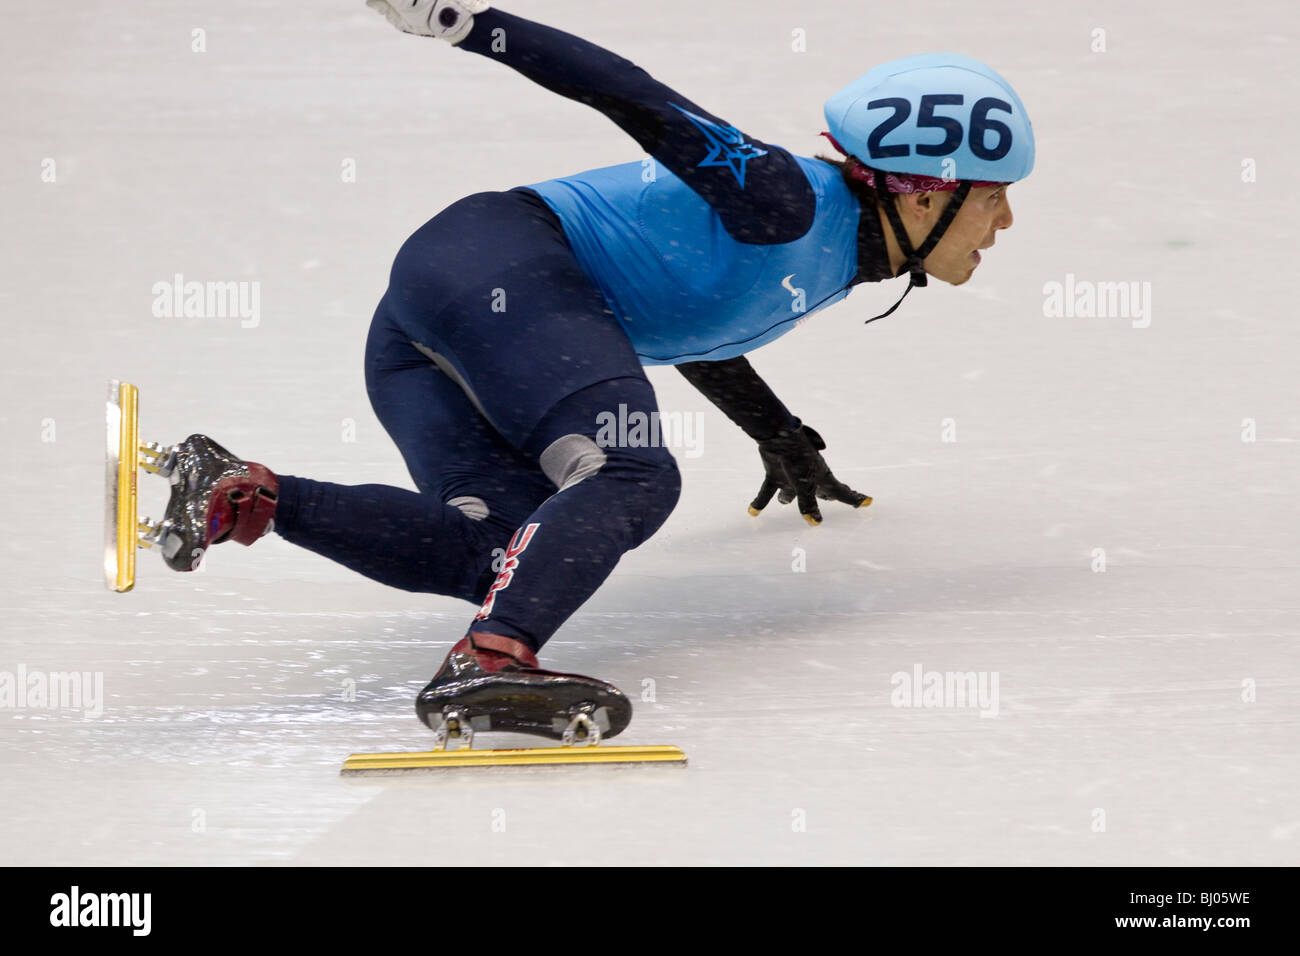 Apolo Anton Ohno (USA) competing in the Short Track Speed Skating Men's 500m event at the 2010 Olympic Winter Games Stock Photo